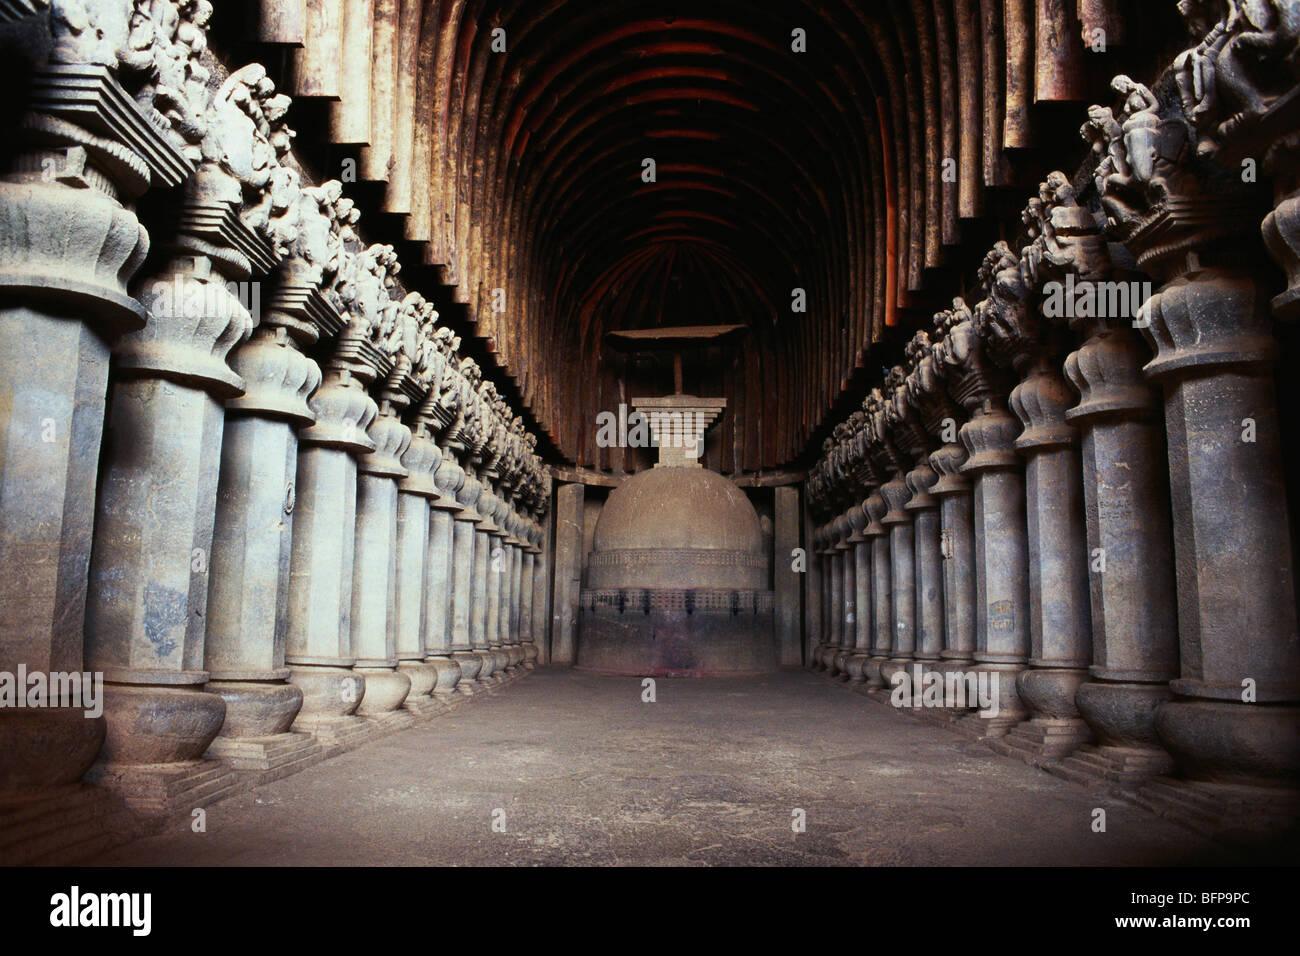 31 Contribution of Buddhism in Architecture of India